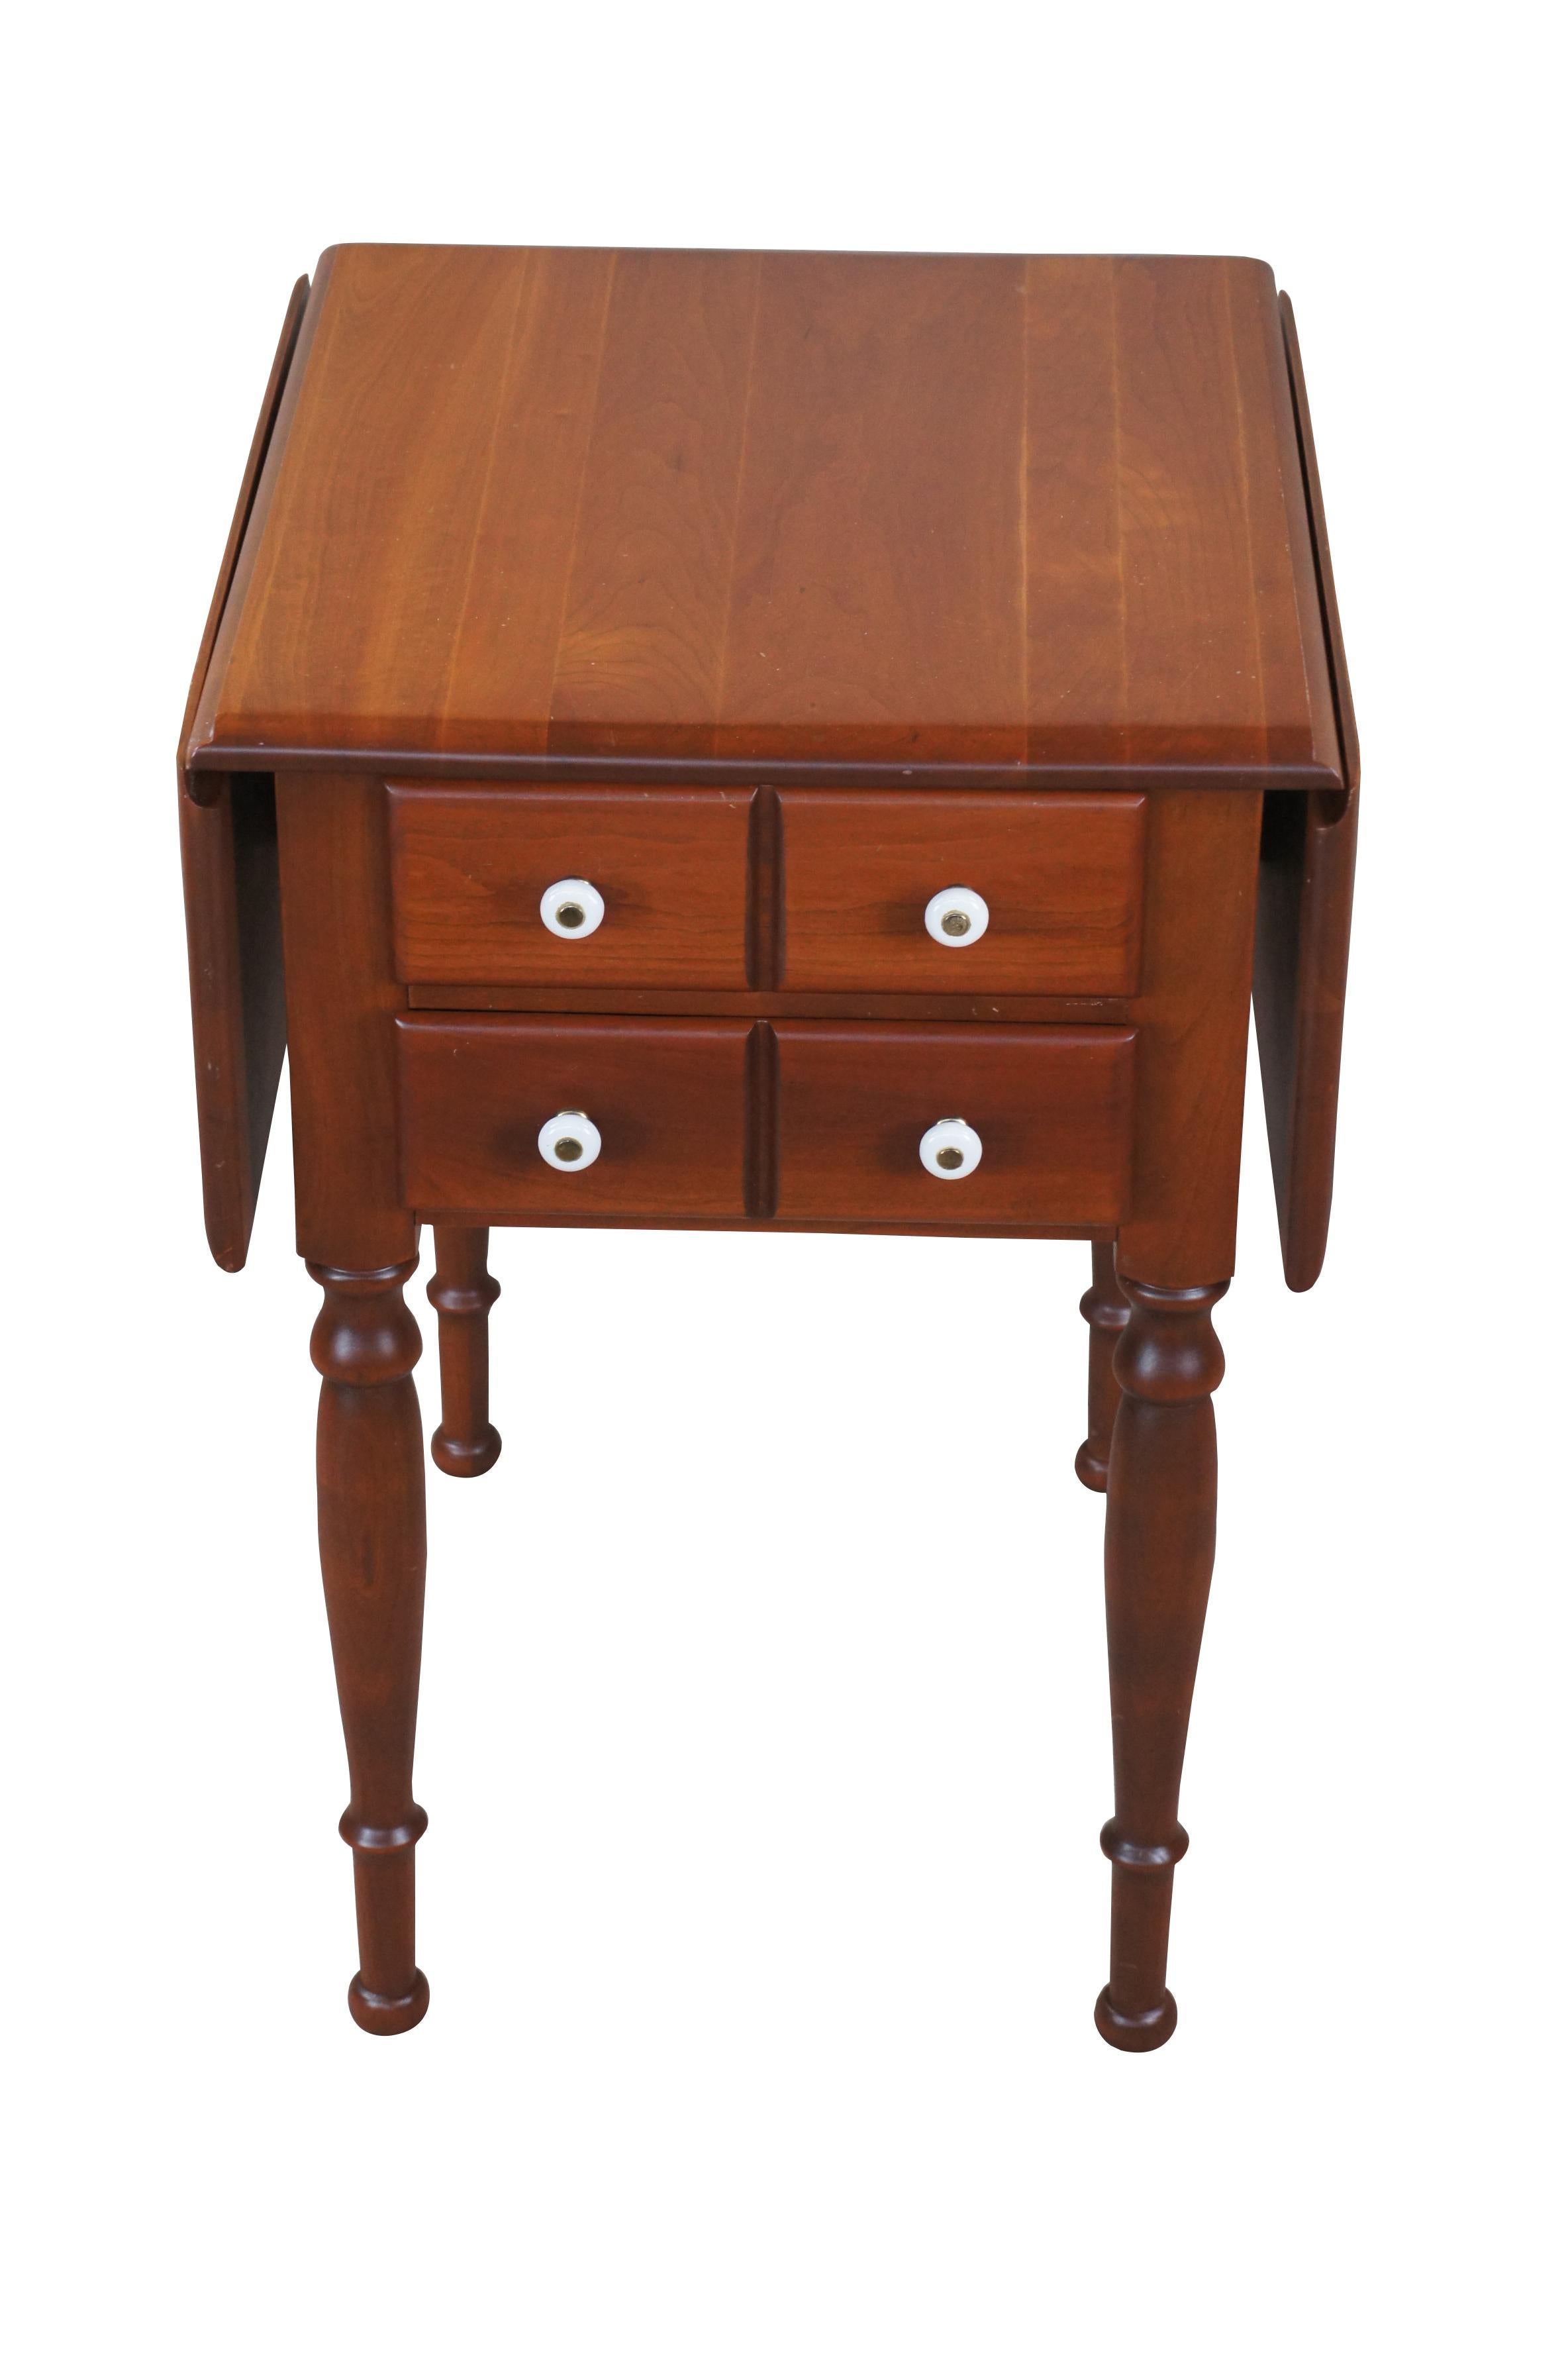 20th Century Early American style drop leaf accent table.  Made of cherry featuring rectangular form with two drop leaves, two drawers with porcelain pulls, and turned legs.

Dimensions: 
18